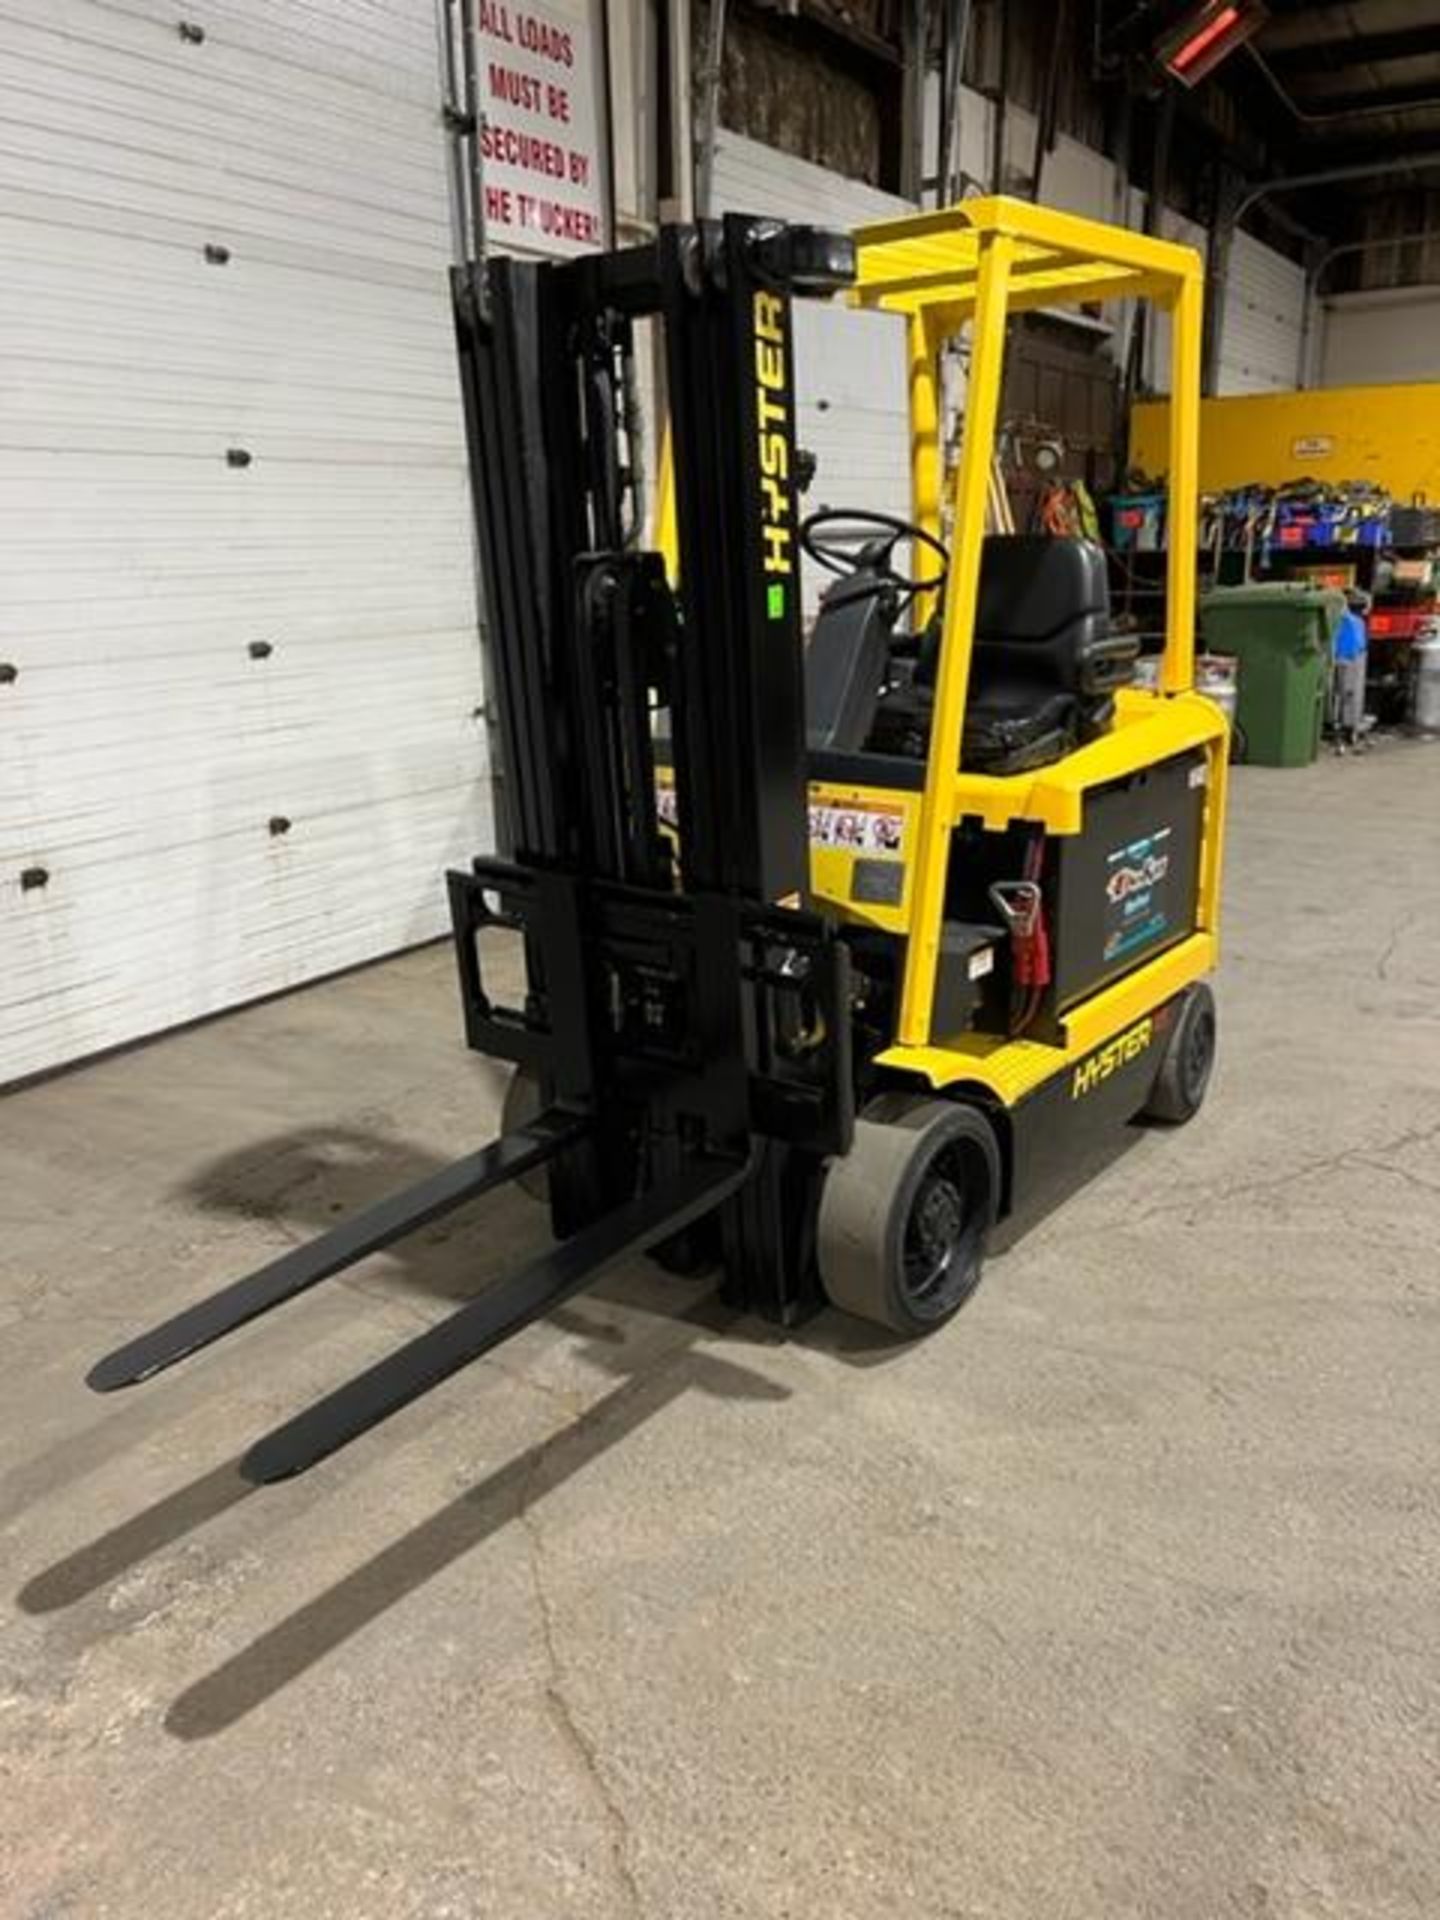 NICE 2008 Hyster model 45 - 4,500lbs Capacity Forklift Electric with Sideshift 4-way 3-stage - Image 2 of 3